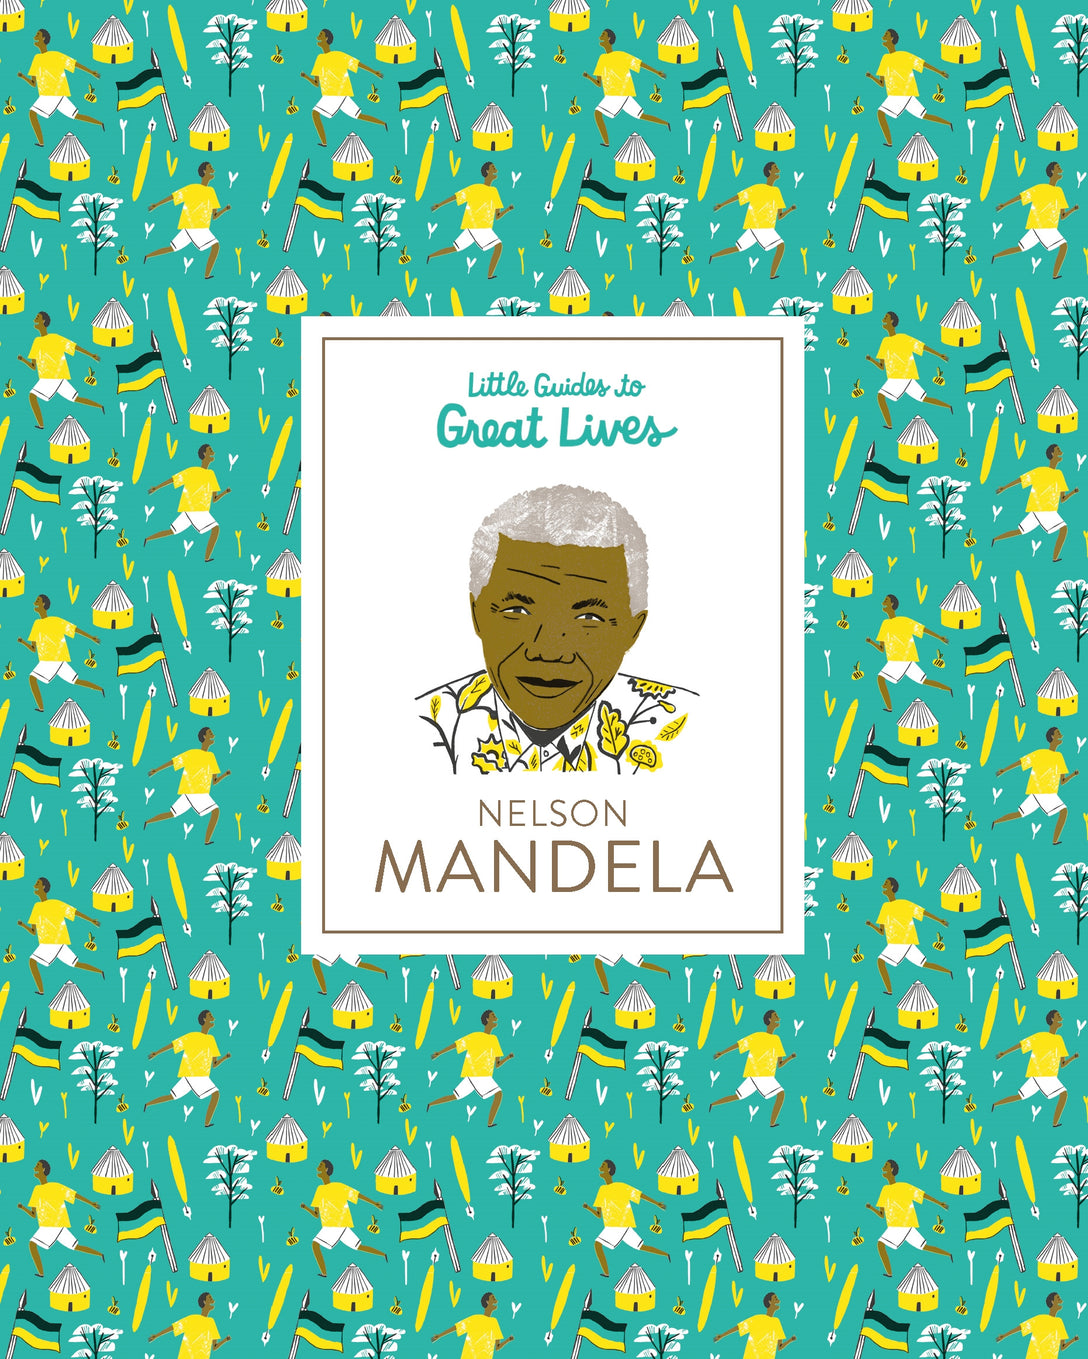 Little Guides to Great Lives: Nelson Mandela by Isabel Thomas, Hannah Warren